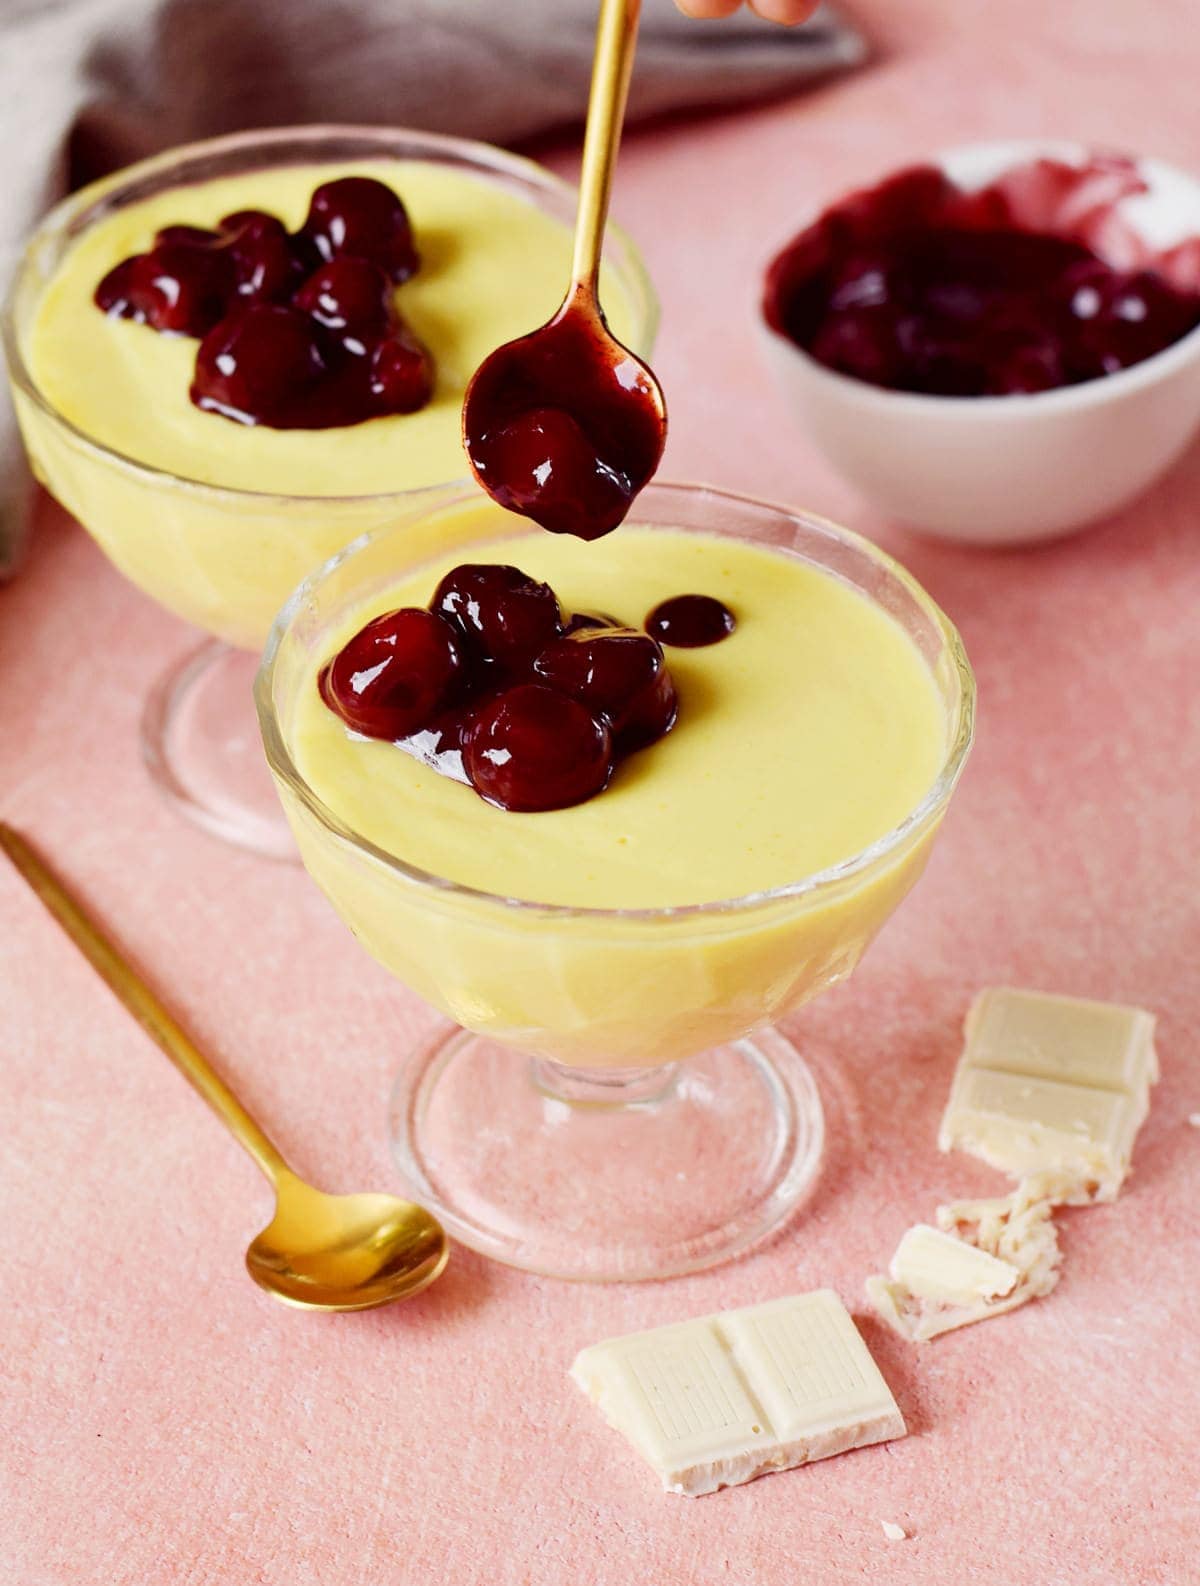 cherry compote being spooned on vegan vanilla pudding in a glass